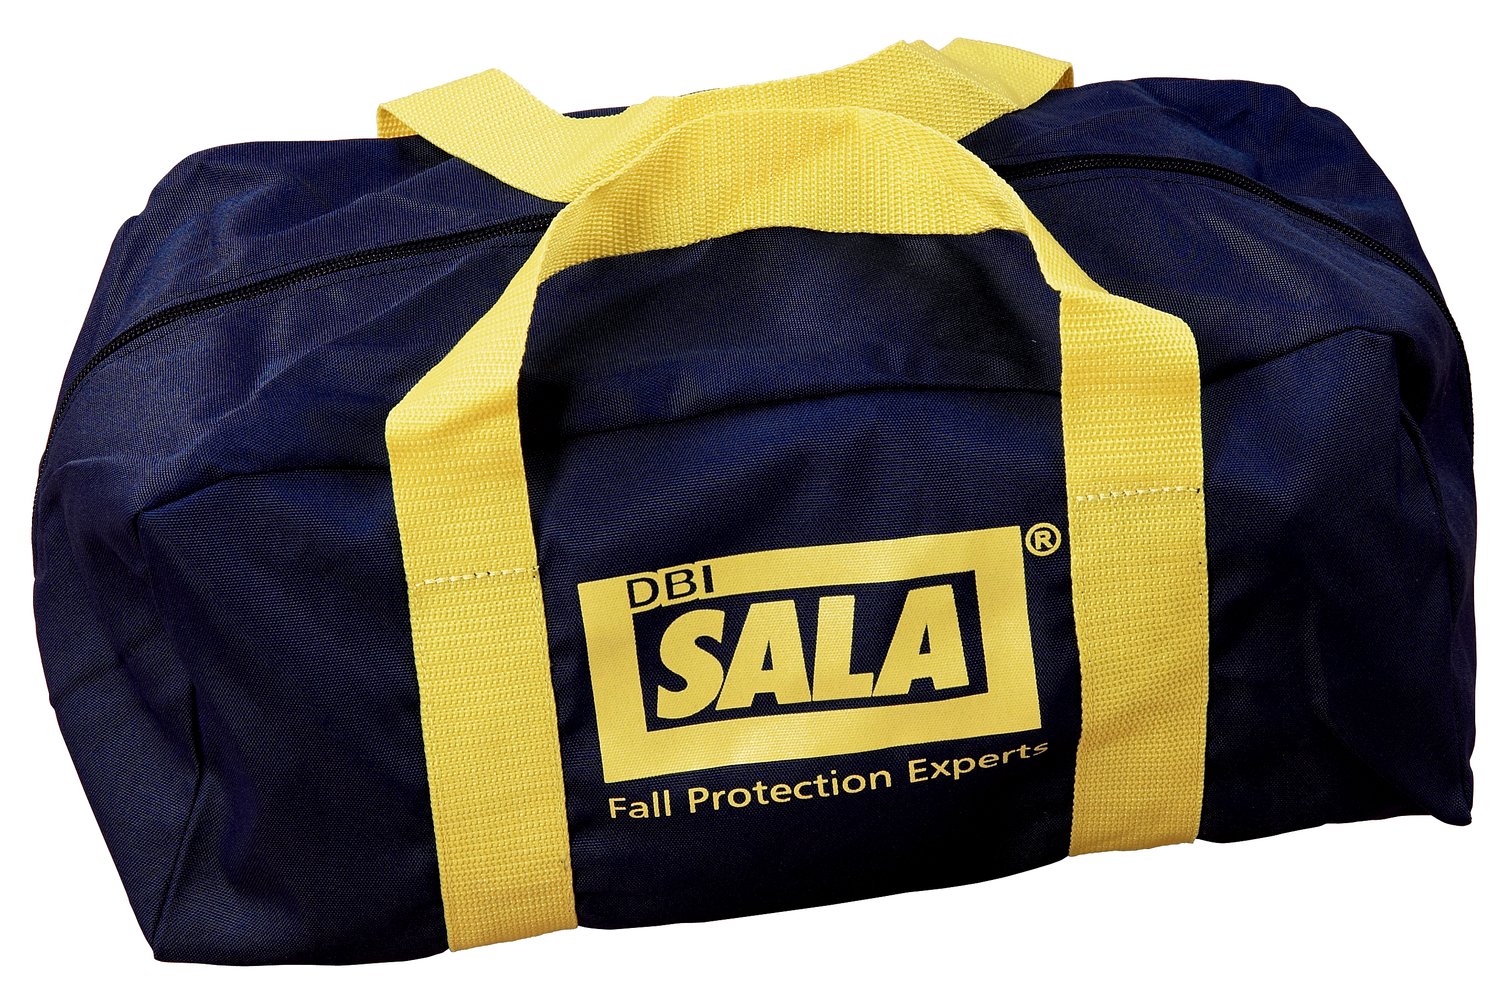 7012691199 - 3M DBI-SALA Equipment Carrying and Storage Bag 9503806, 10.5 in x 12 in x 19.5 in